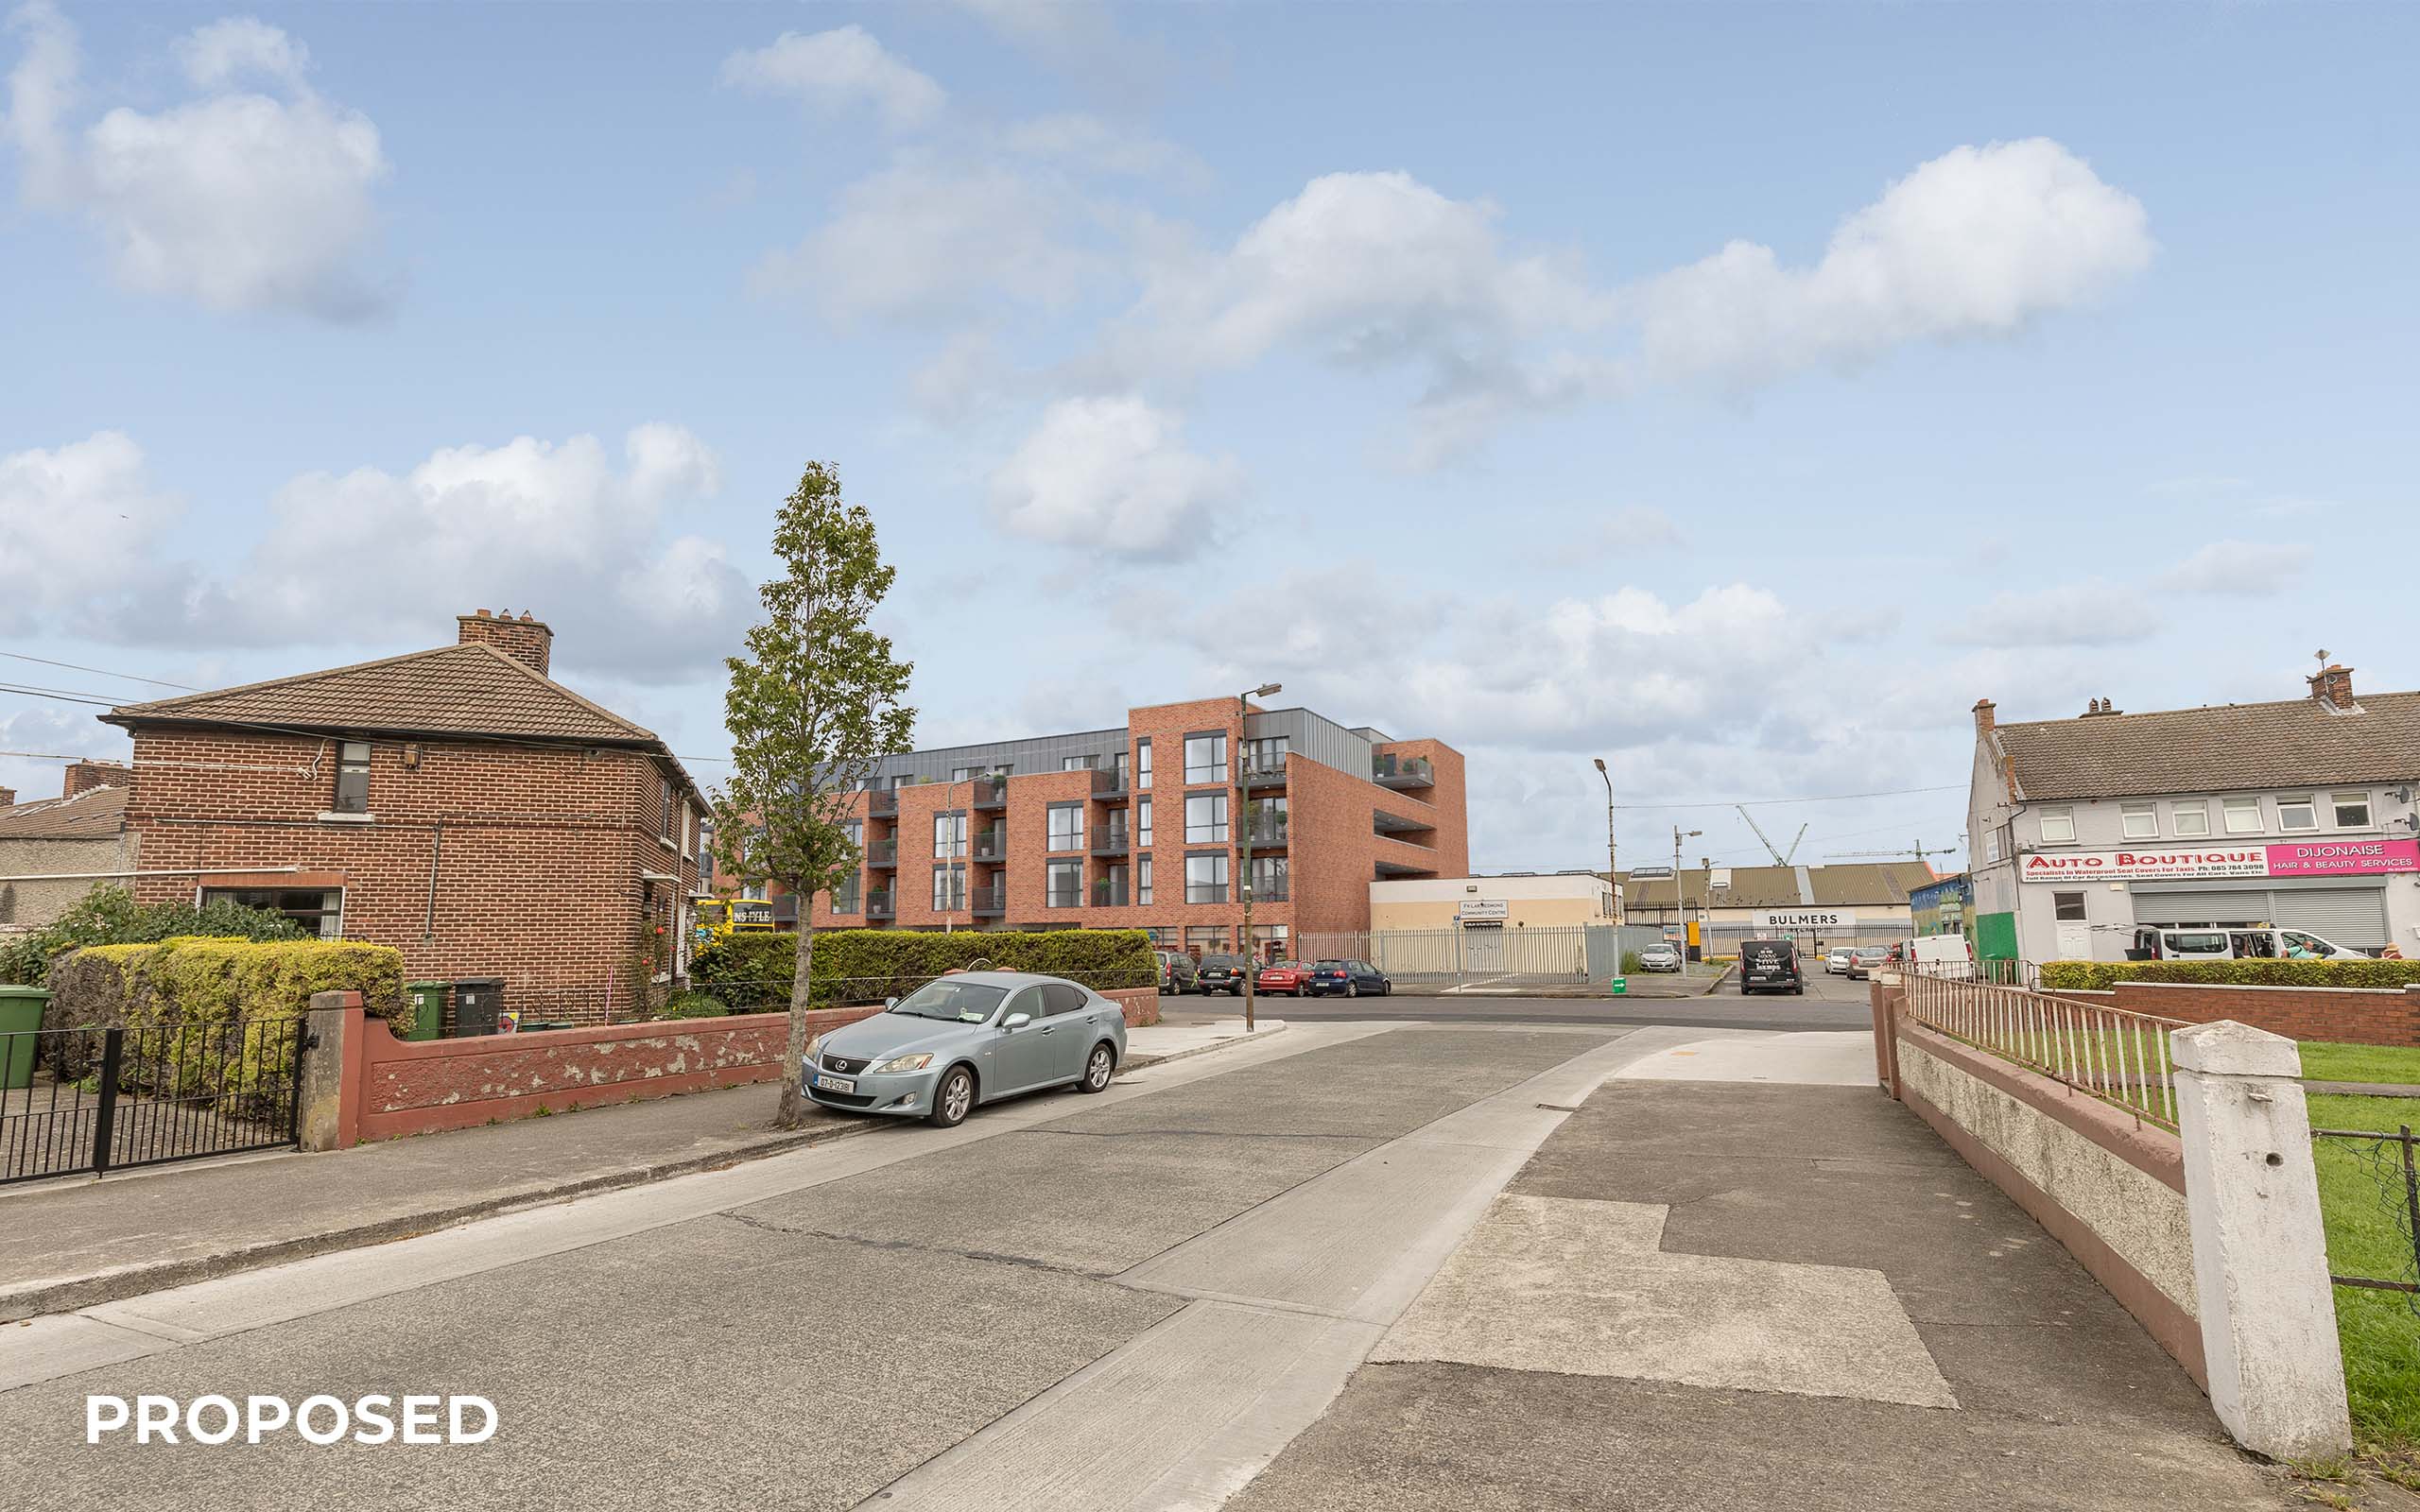 Verified View Montage of Keepers Road Residential Development in Drimnagh, Dublin 12 (proposed).